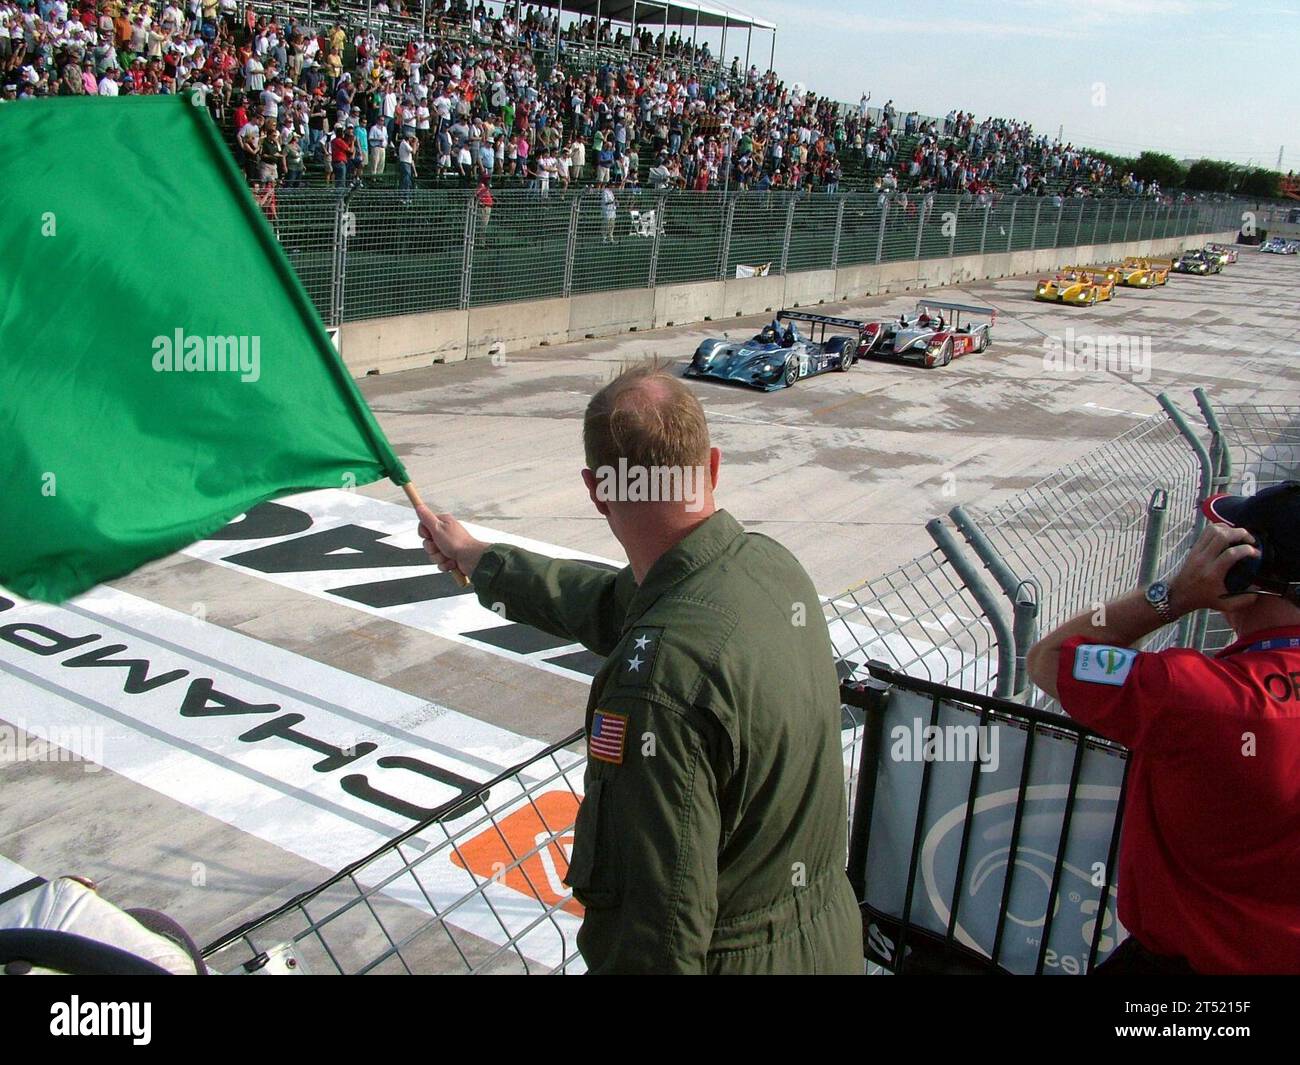 0704217665S-074 HOUSTON, Texas (April 21, 2007) Р Commander, Naval Strike and Air Warfare Center, Rear Adm. Mark T. Emerson, waves the green flag to signal the start of the American Le Mans Series sport car race at Houston. The American Le Mans Series is a series of North American professional sports car races. U.S. Navy Stock Photo